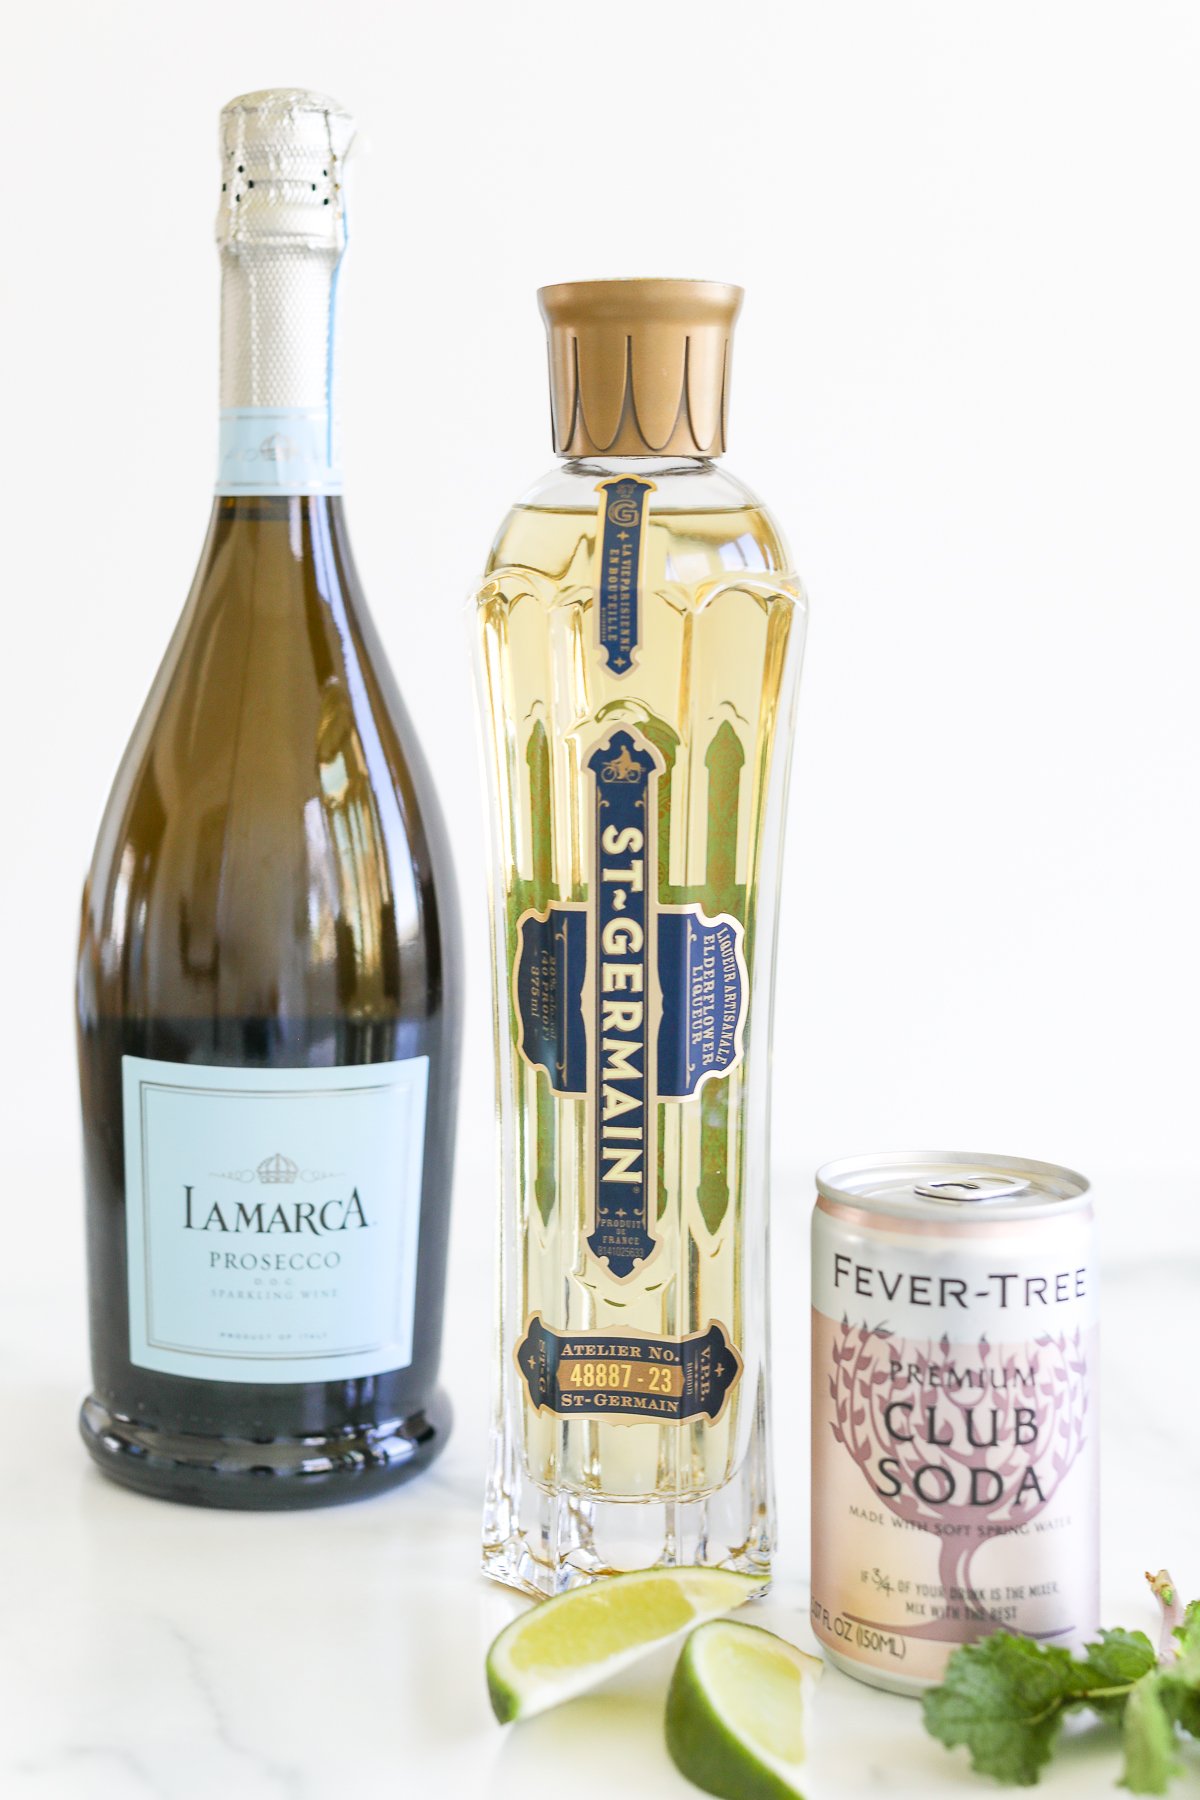 A bottle of St-Germain elderflower liqueur, a bottle of LaMarca prosecco, a can of Fever-Tree premium club soda, and slices of lime arranged on a marble surface for